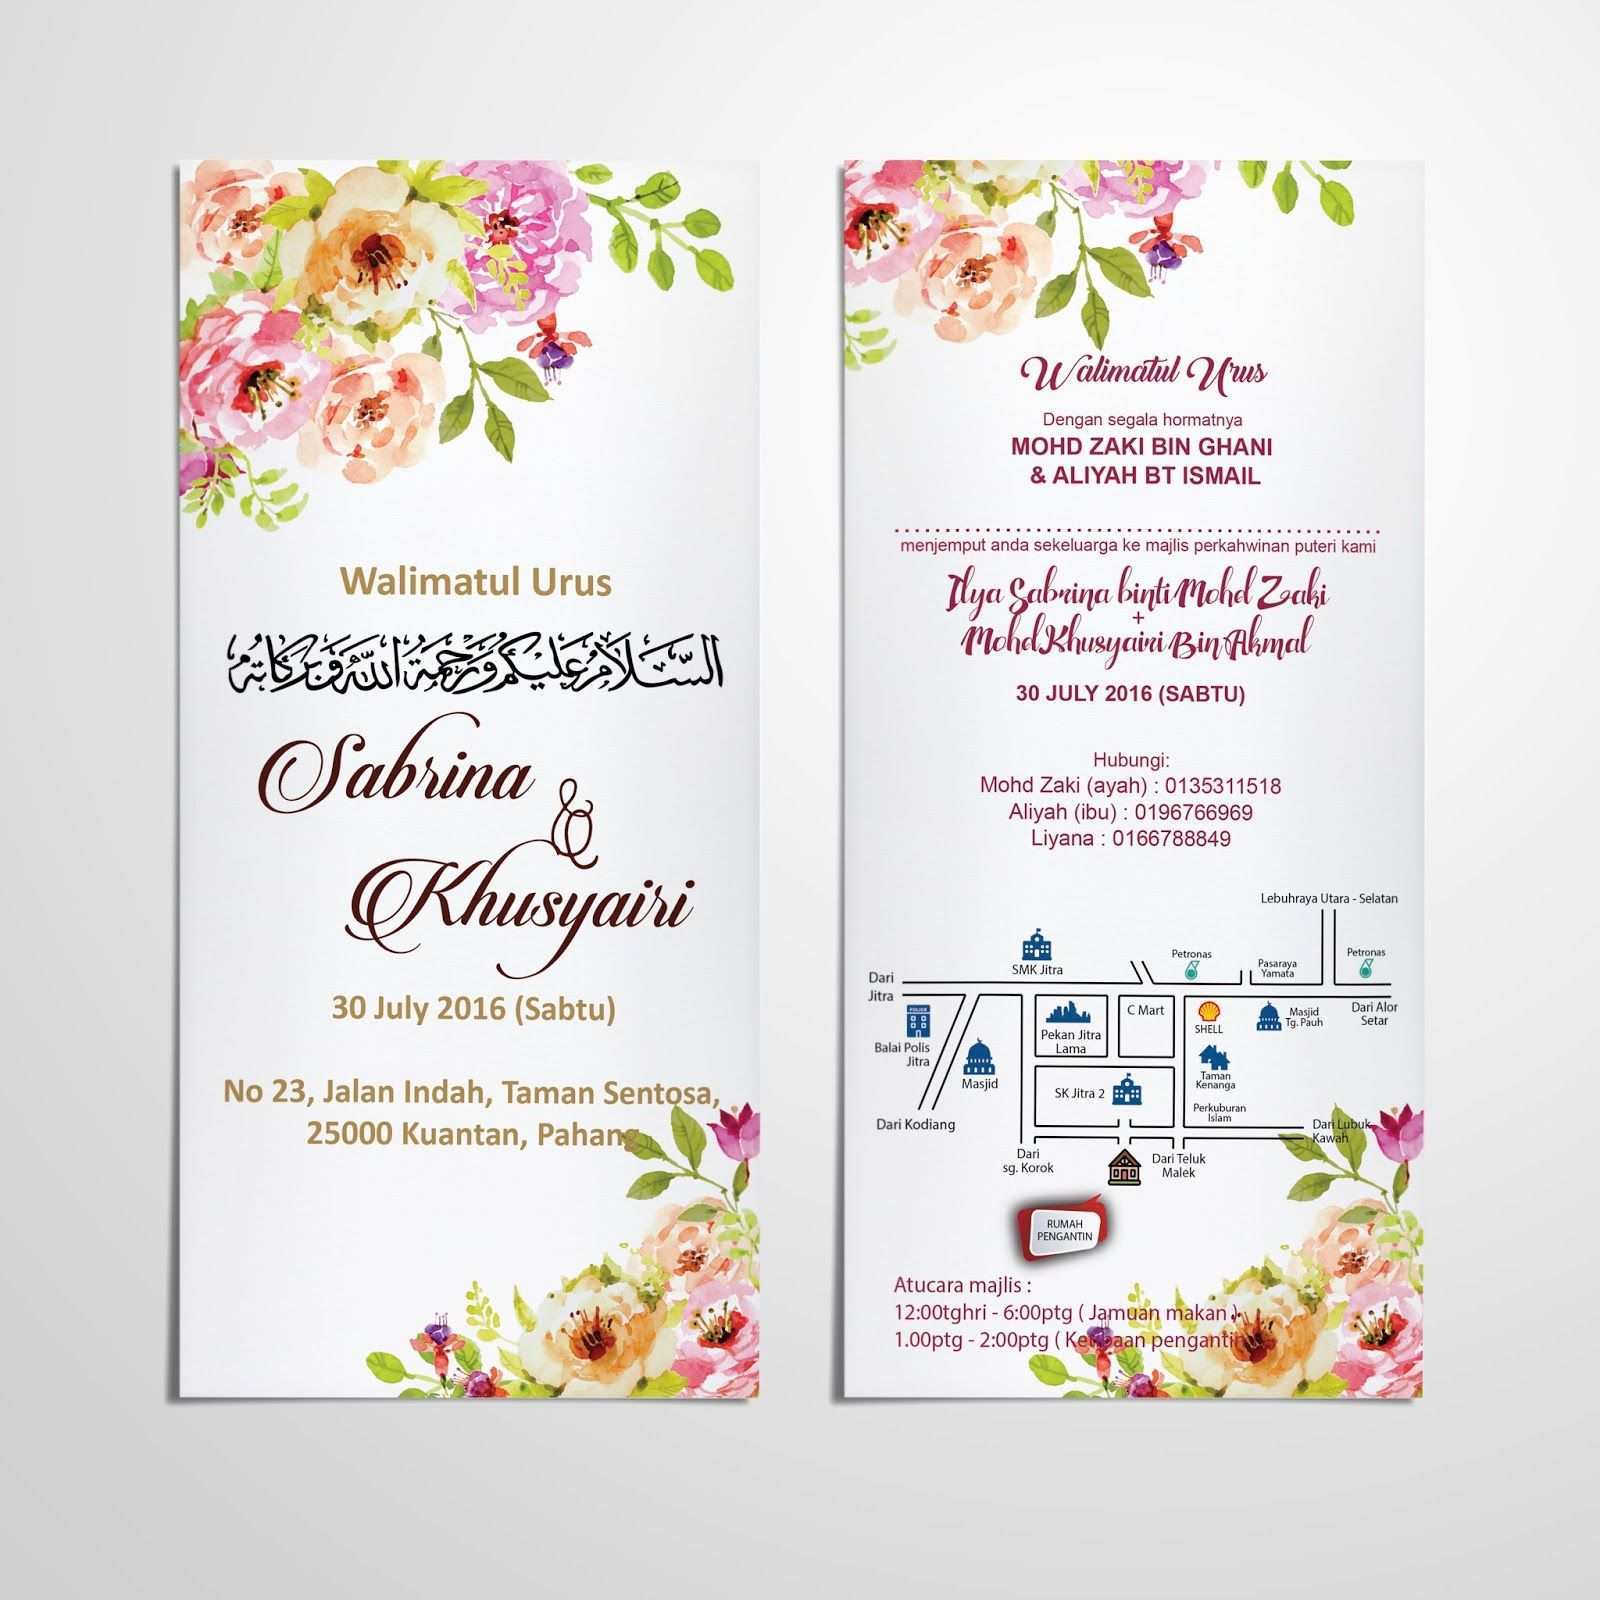 95 Adding Template Kad Kahwin In Word For Template Kad Kahwin Cards Design Templates